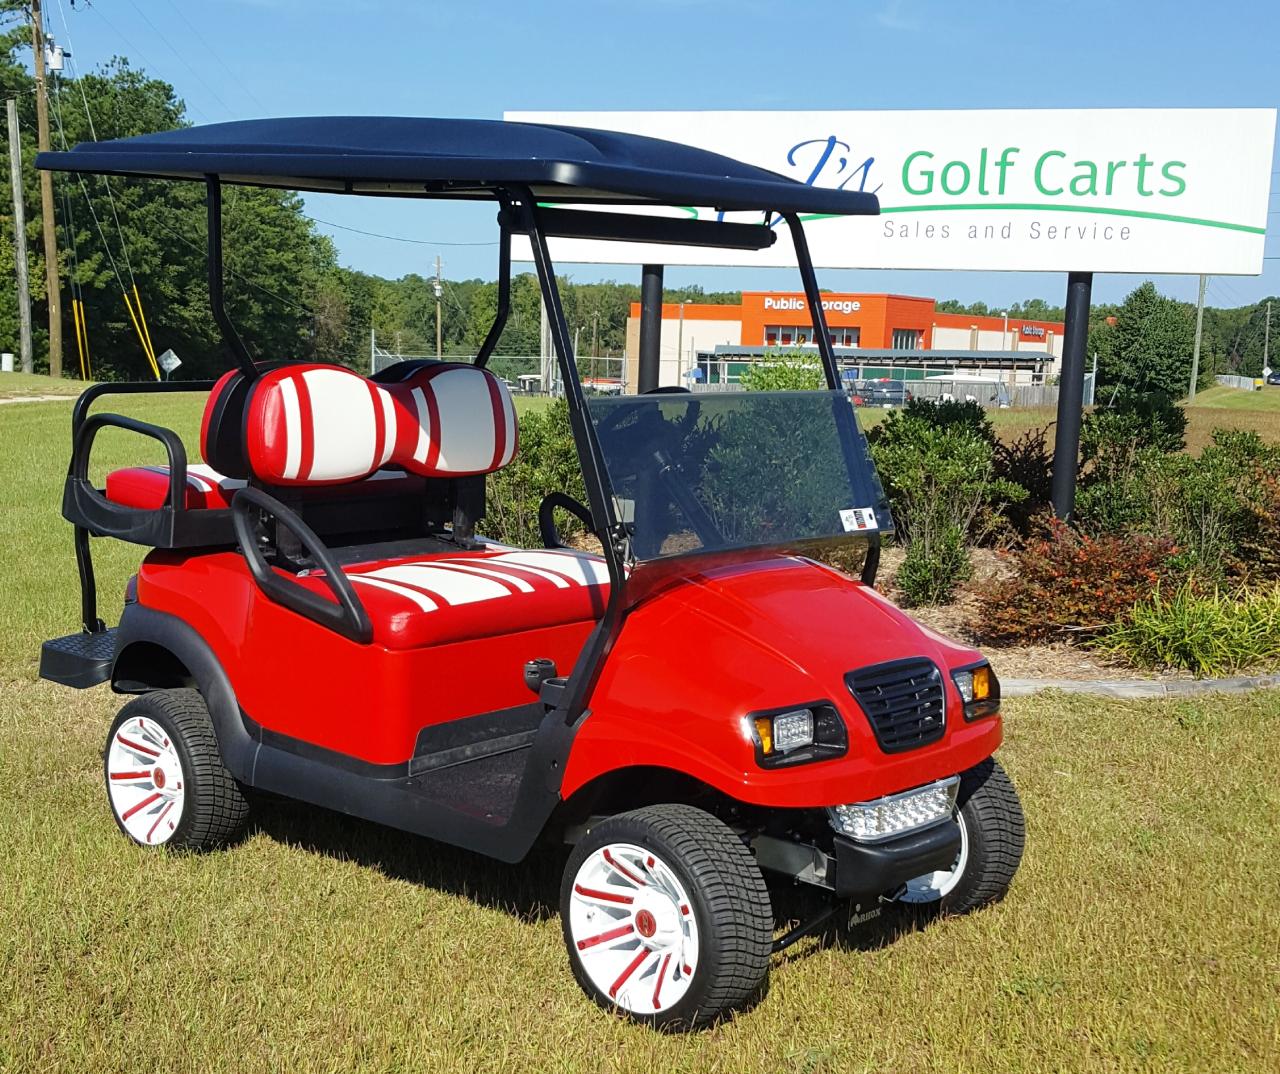 Find Your Perfect Ride: Used Golf Carts for Sale by Owner in Chippewa, Wisconsin